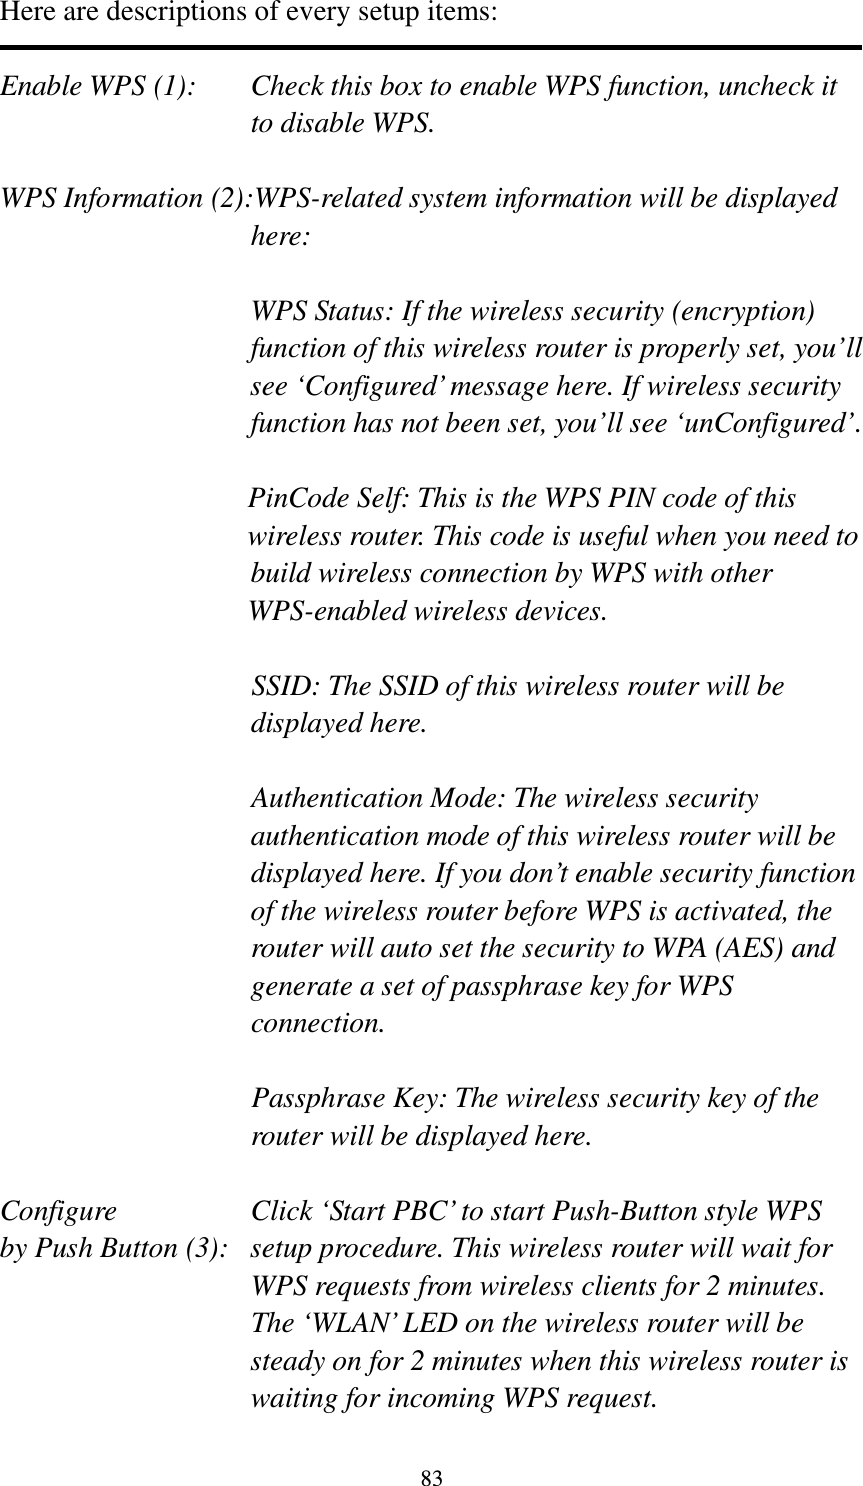 83 Here are descriptions of every setup items:  Enable WPS (1):  Check this box to enable WPS function, uncheck it to disable WPS.  WPS Information (2):WPS-related system information will be displayed here:  WPS Status: If the wireless security (encryption) function of this wireless router is properly set, you’ll see ‘Configured’ message here. If wireless security function has not been set, you’ll see ‘unConfigured’.  PinCode Self: This is the WPS PIN code of this wireless router. This code is useful when you need to  build wireless connection by WPS with other WPS-enabled wireless devices.  SSID: The SSID of this wireless router will be displayed here.  Authentication Mode: The wireless security authentication mode of this wireless router will be displayed here. If you don’t enable security function of the wireless router before WPS is activated, the router will auto set the security to WPA (AES) and generate a set of passphrase key for WPS connection.  Passphrase Key: The wireless security key of the router will be displayed here.  Configure      Click ‘Start PBC’ to start Push-Button style WPS by Push Button (3):  setup procedure. This wireless router will wait for WPS requests from wireless clients for 2 minutes. The ‘WLAN’ LED on the wireless router will be steady on for 2 minutes when this wireless router is waiting for incoming WPS request. 